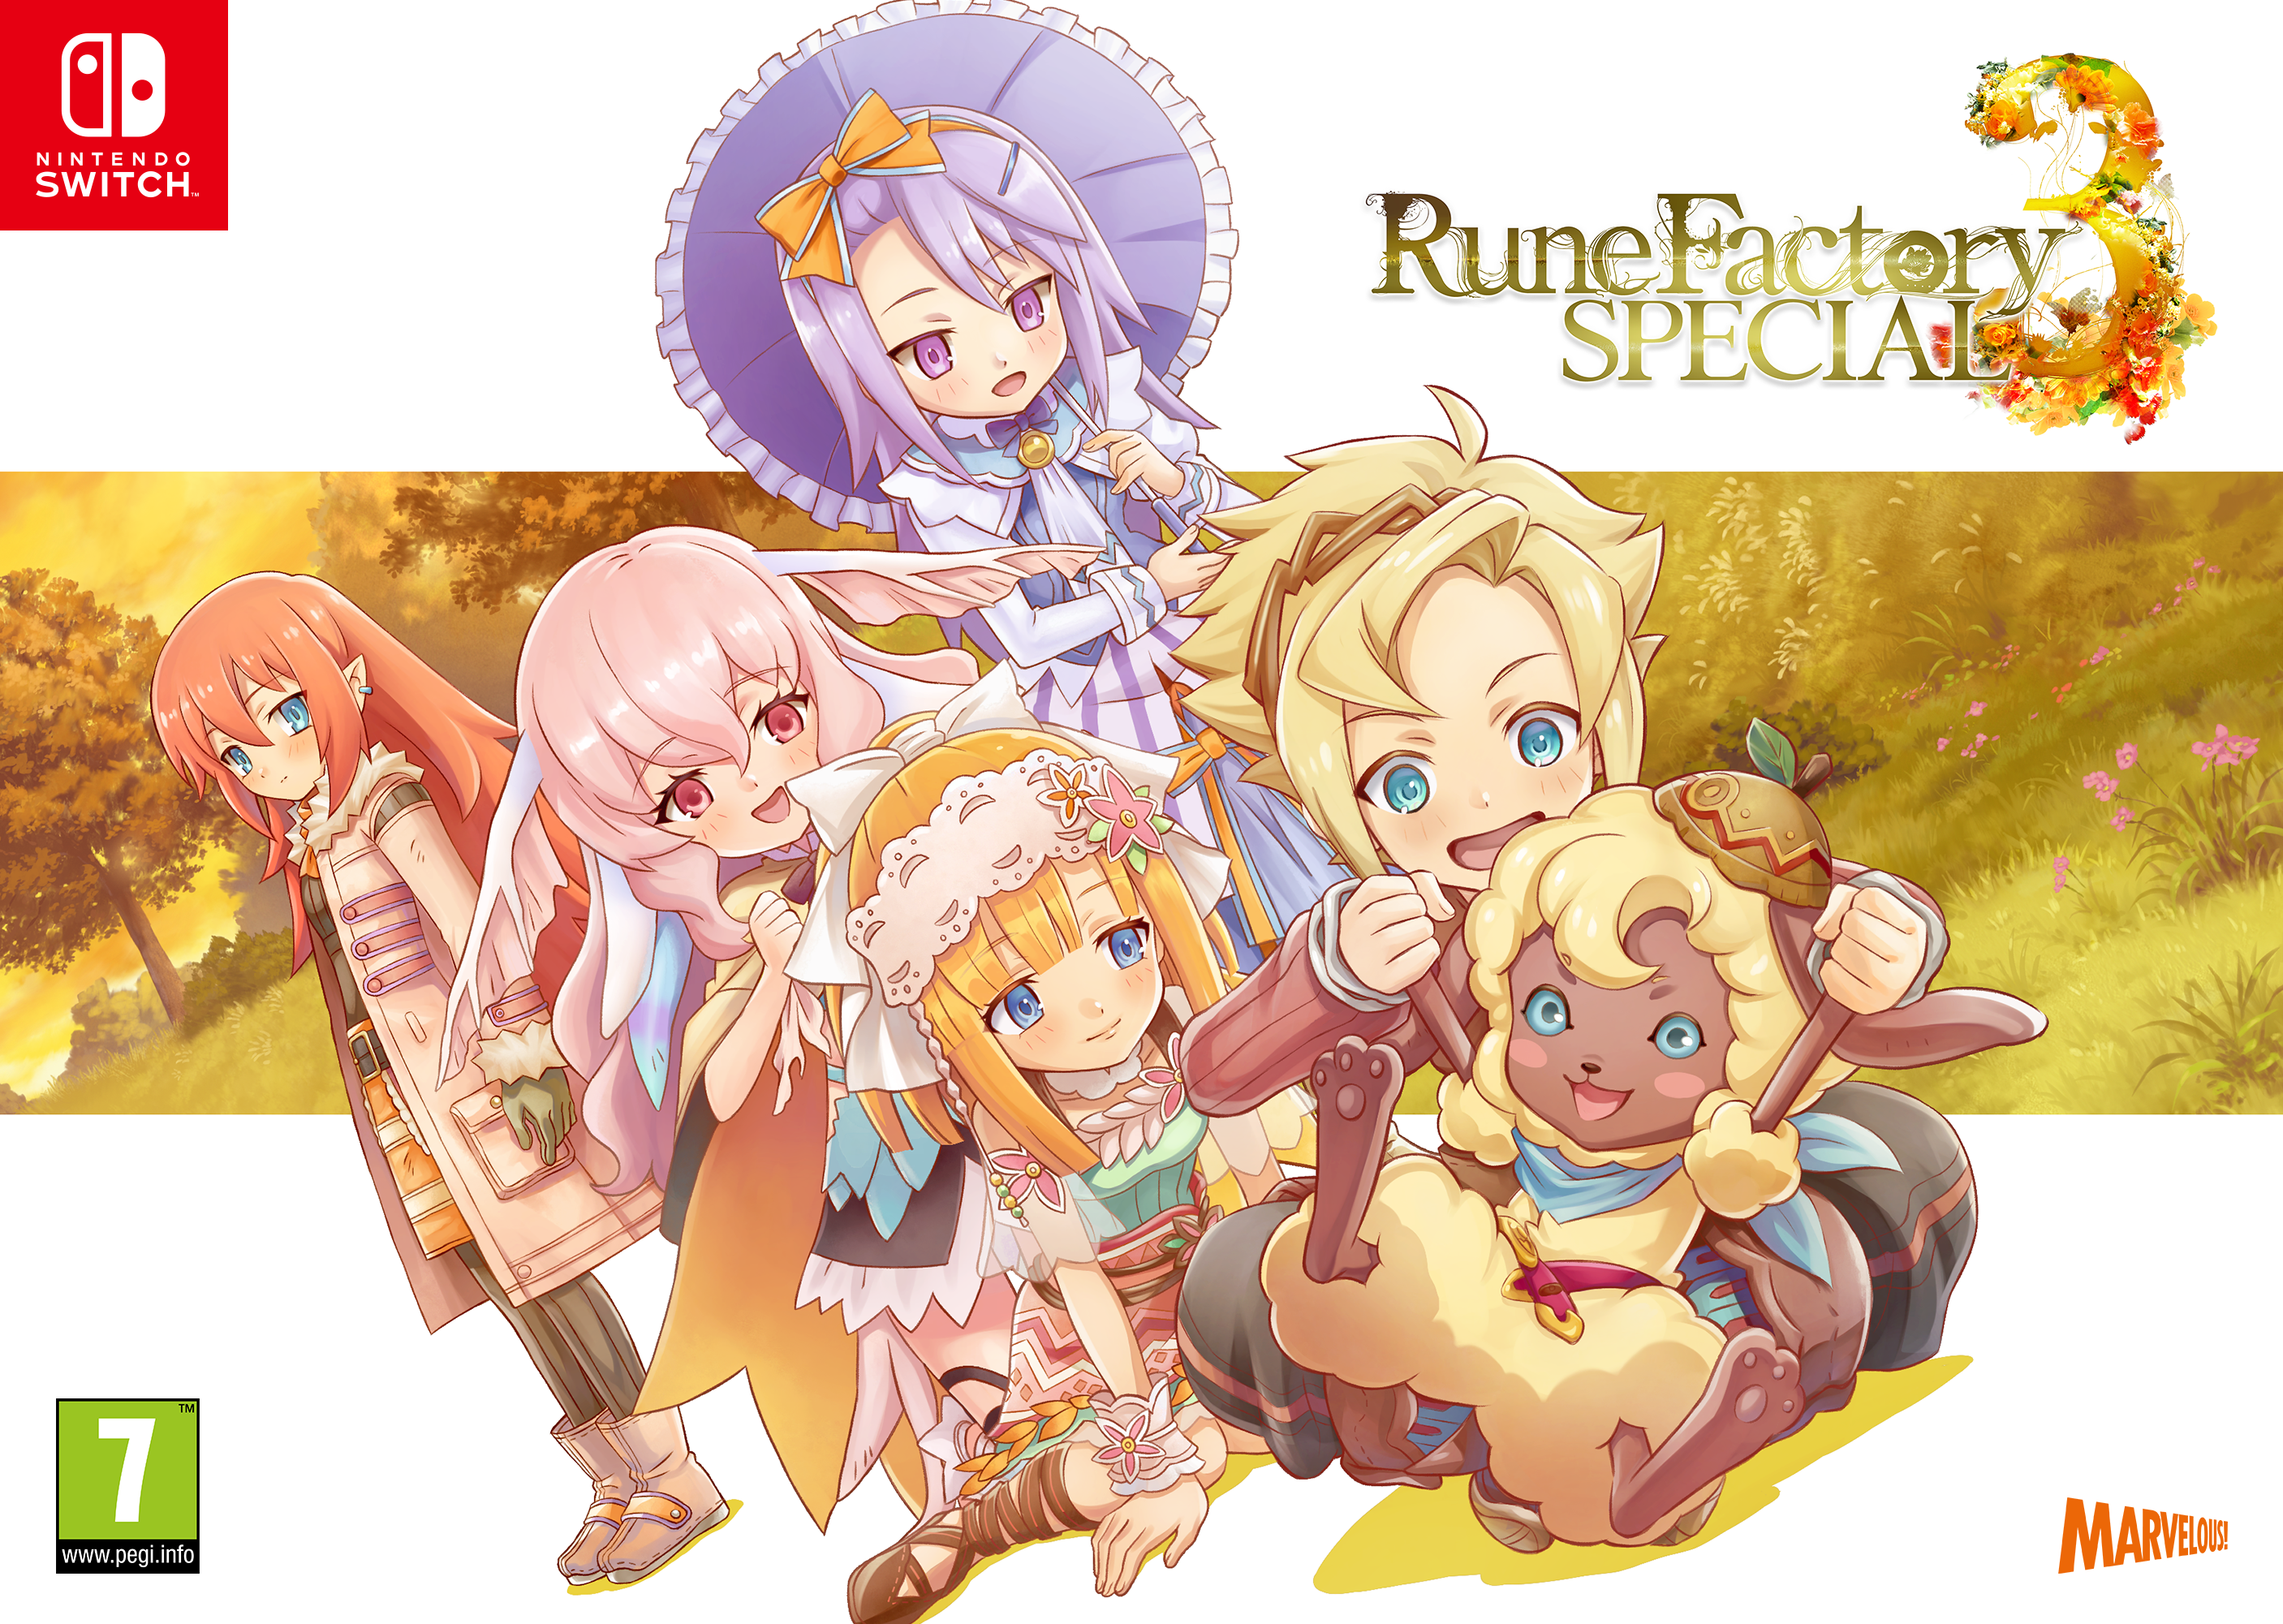 rune-factory-3-special-limited-edition.png